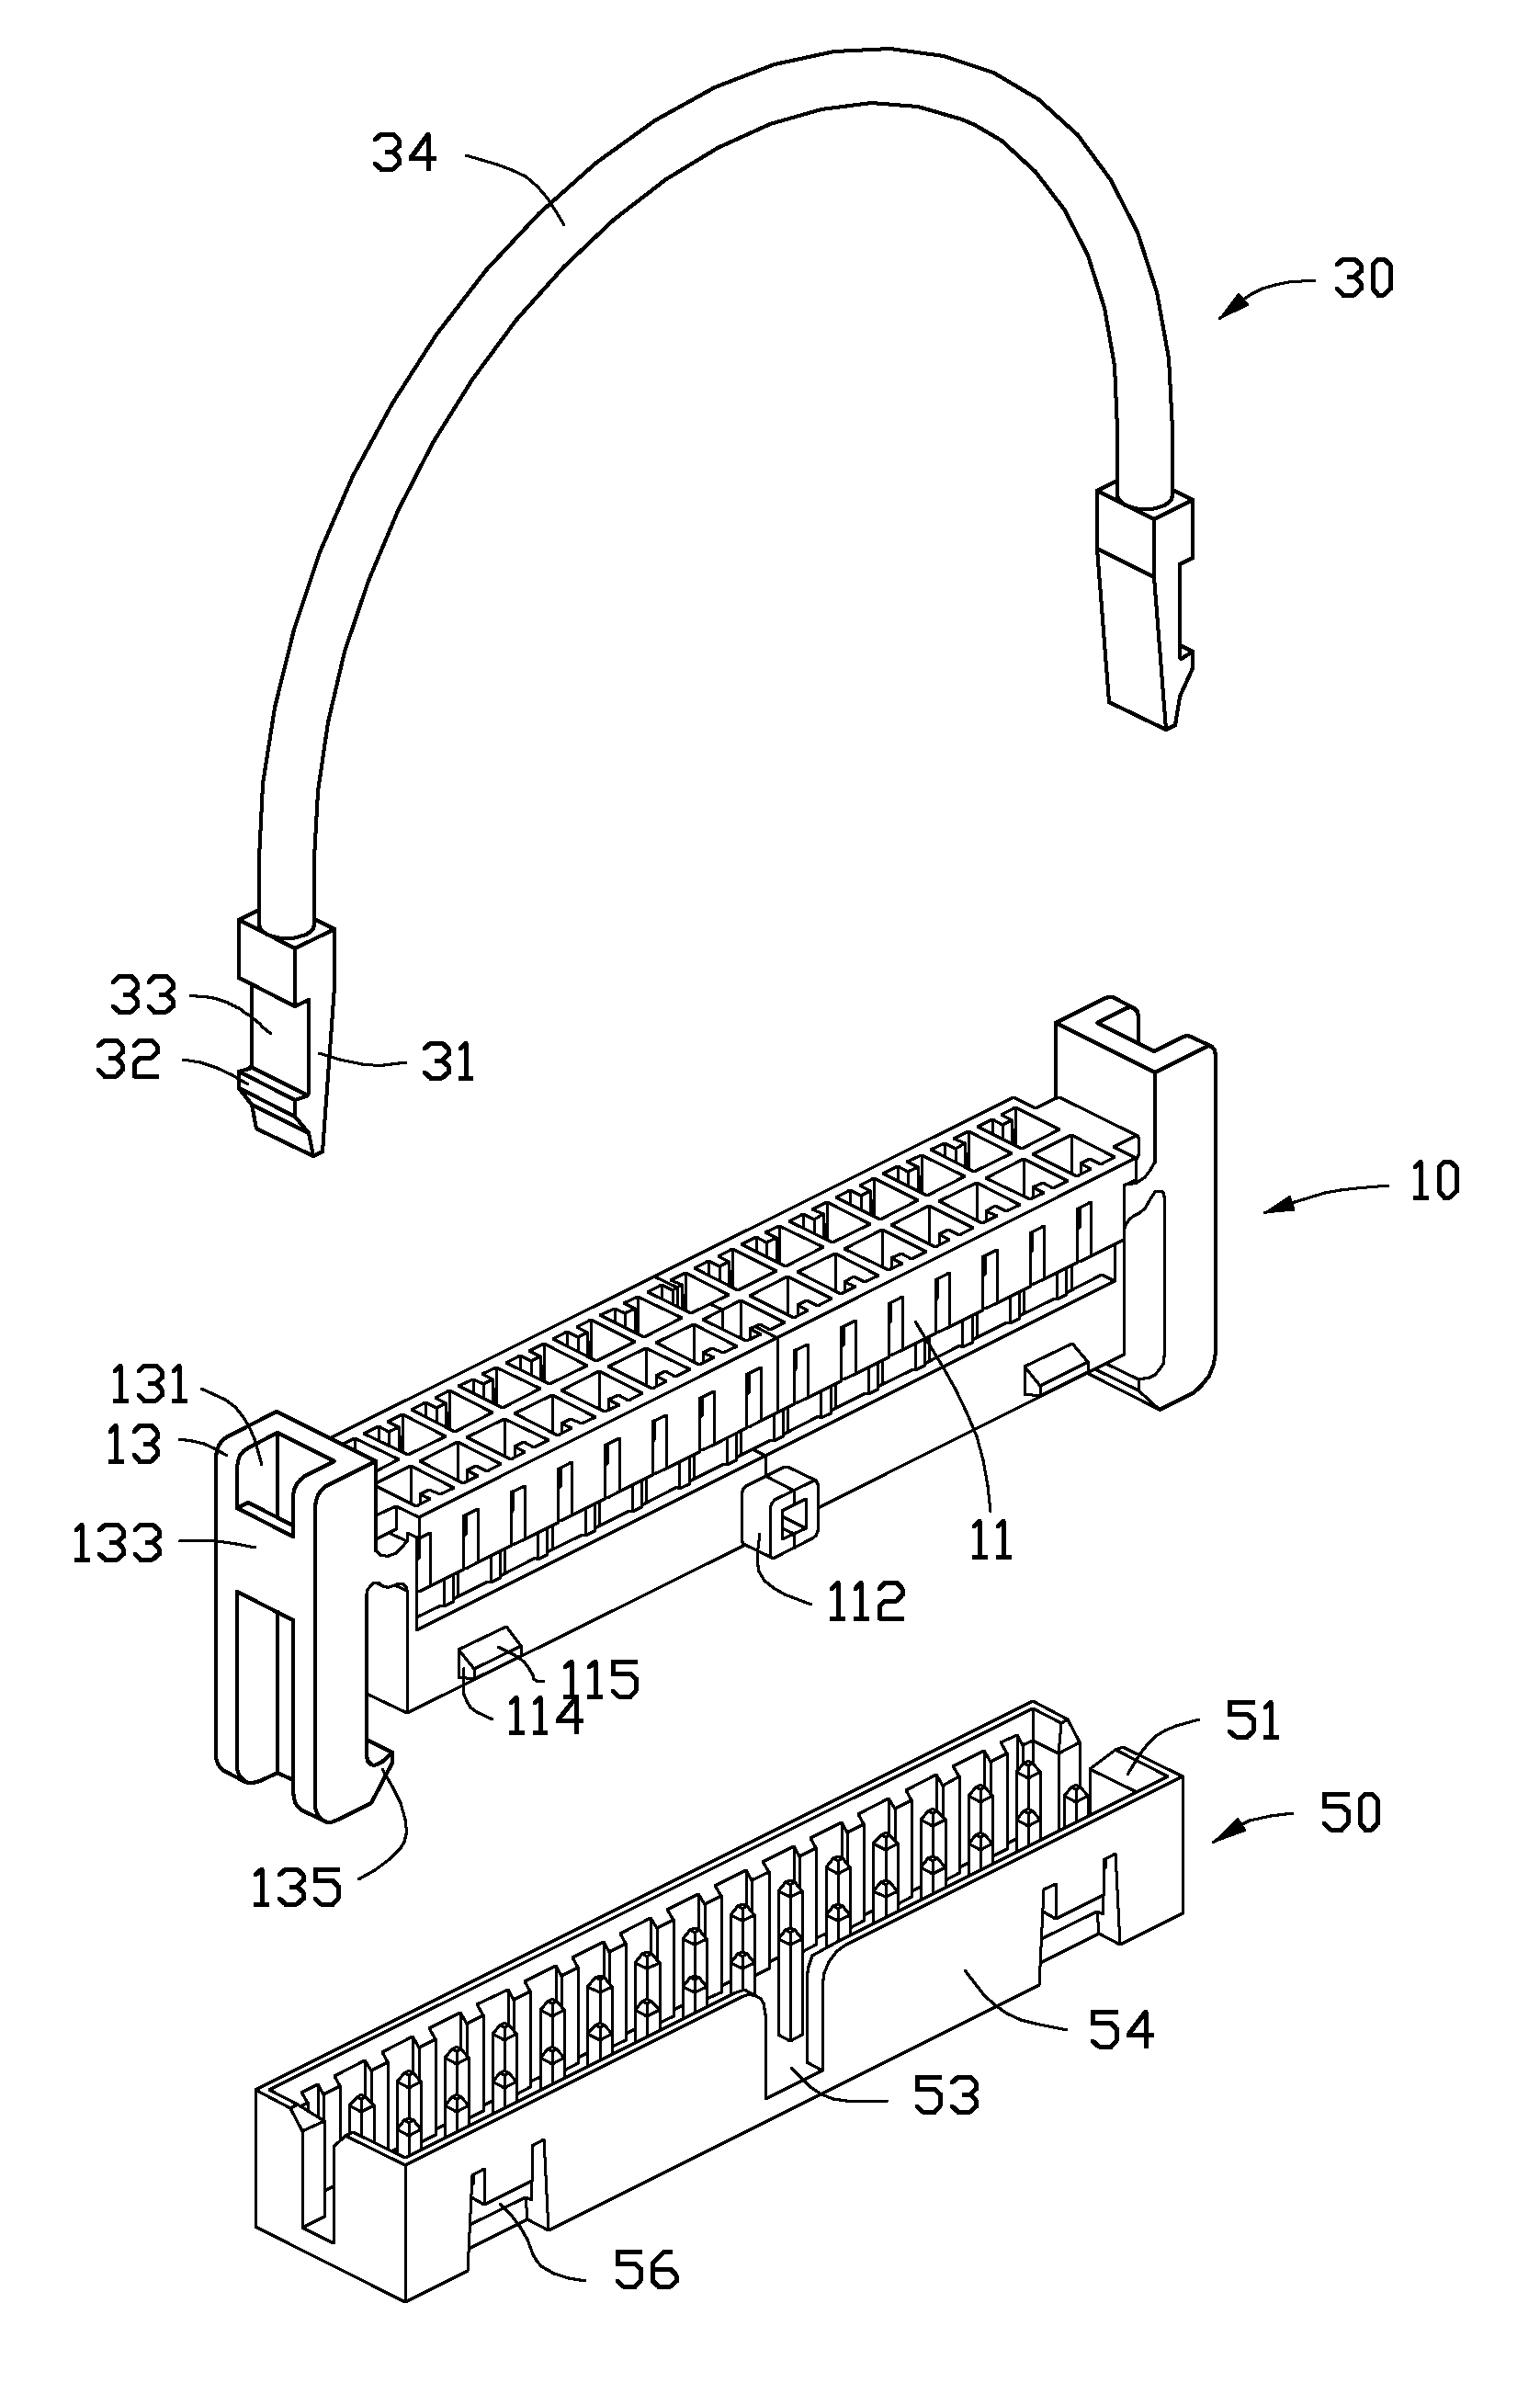 Electronic connector assembly